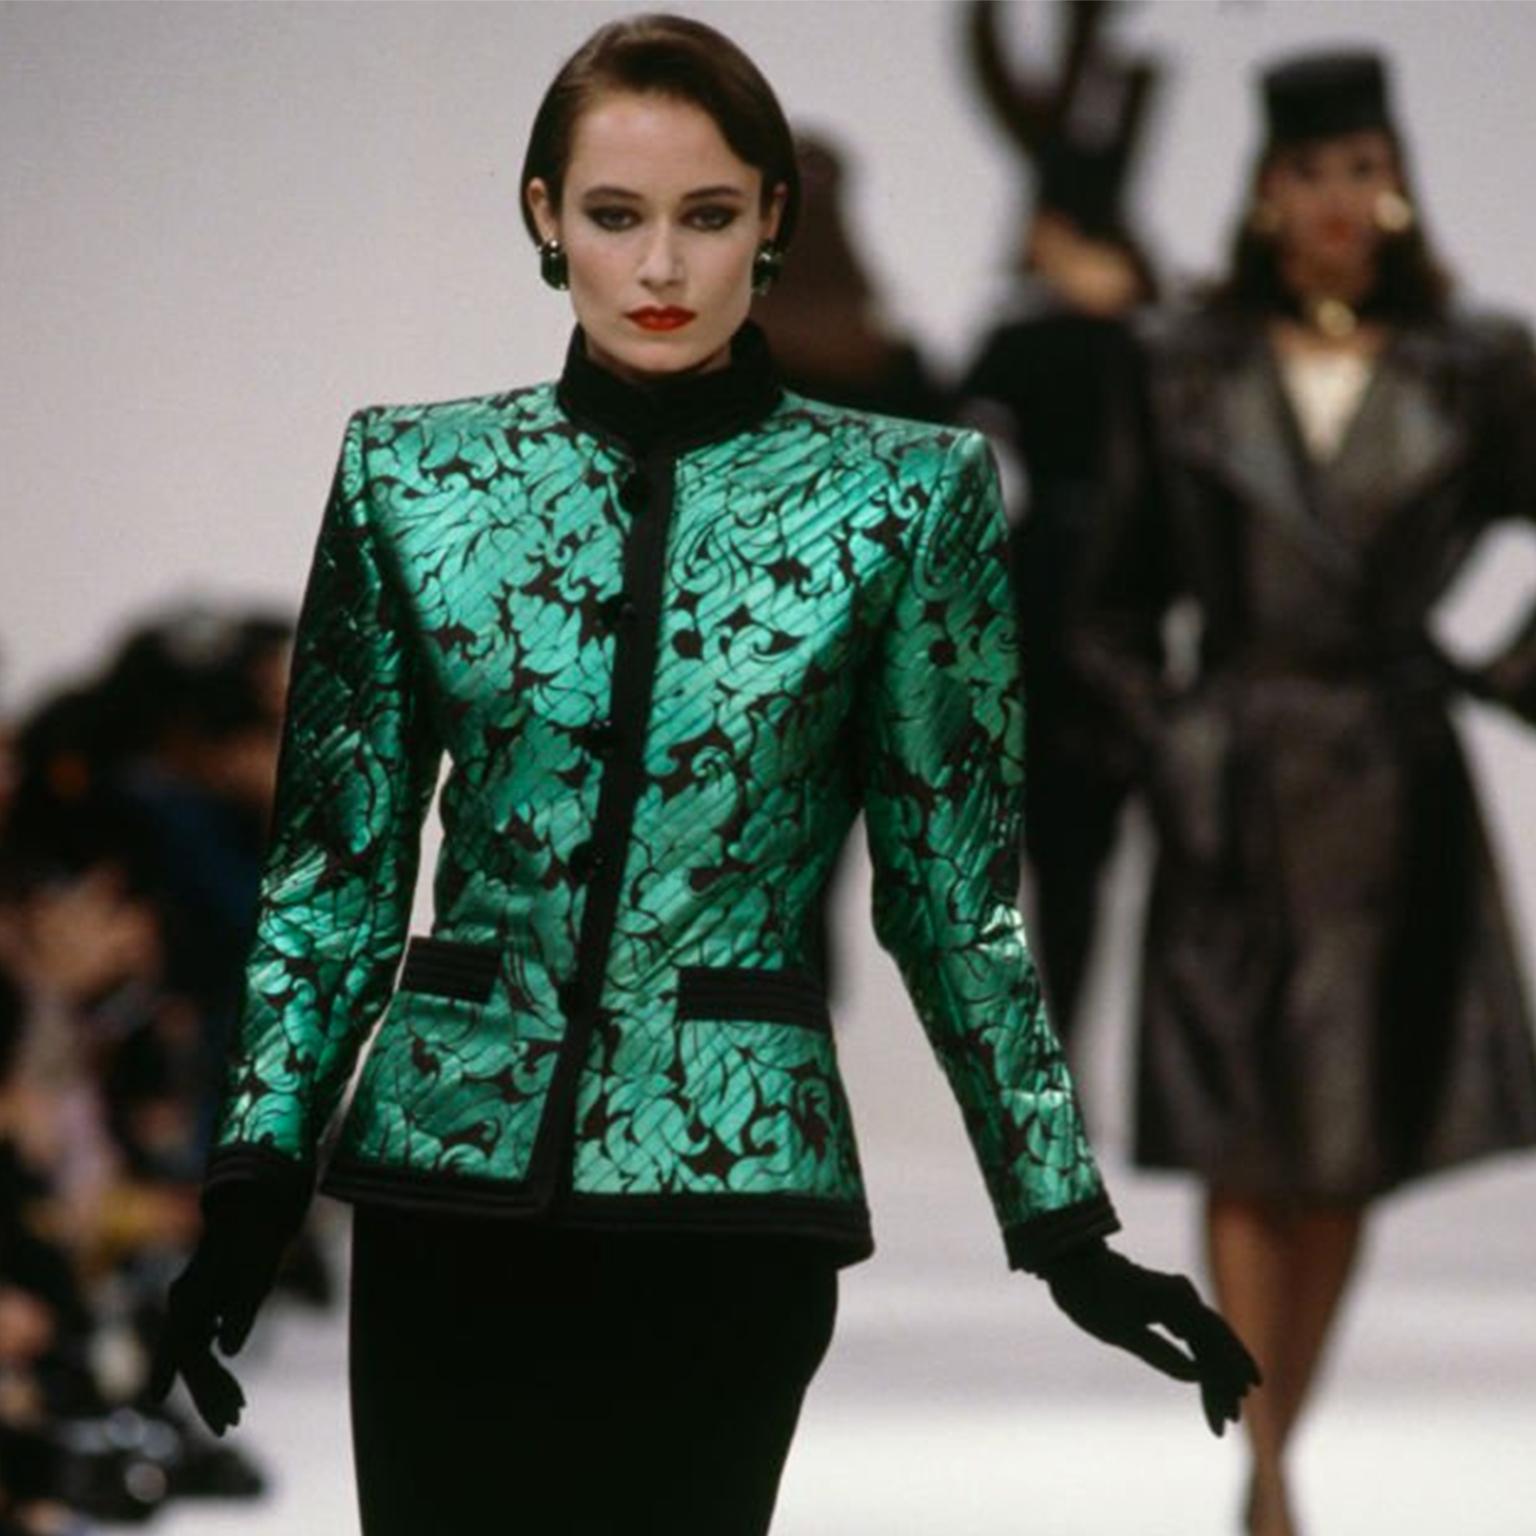 This is a stunning vintage Yves Saint Laurent Fall/Winter 1986.87 runway documented baroque style green lame jacket with black satin quilted trim. We especially love the intricate black topstitching throughout the jacket that makes it so